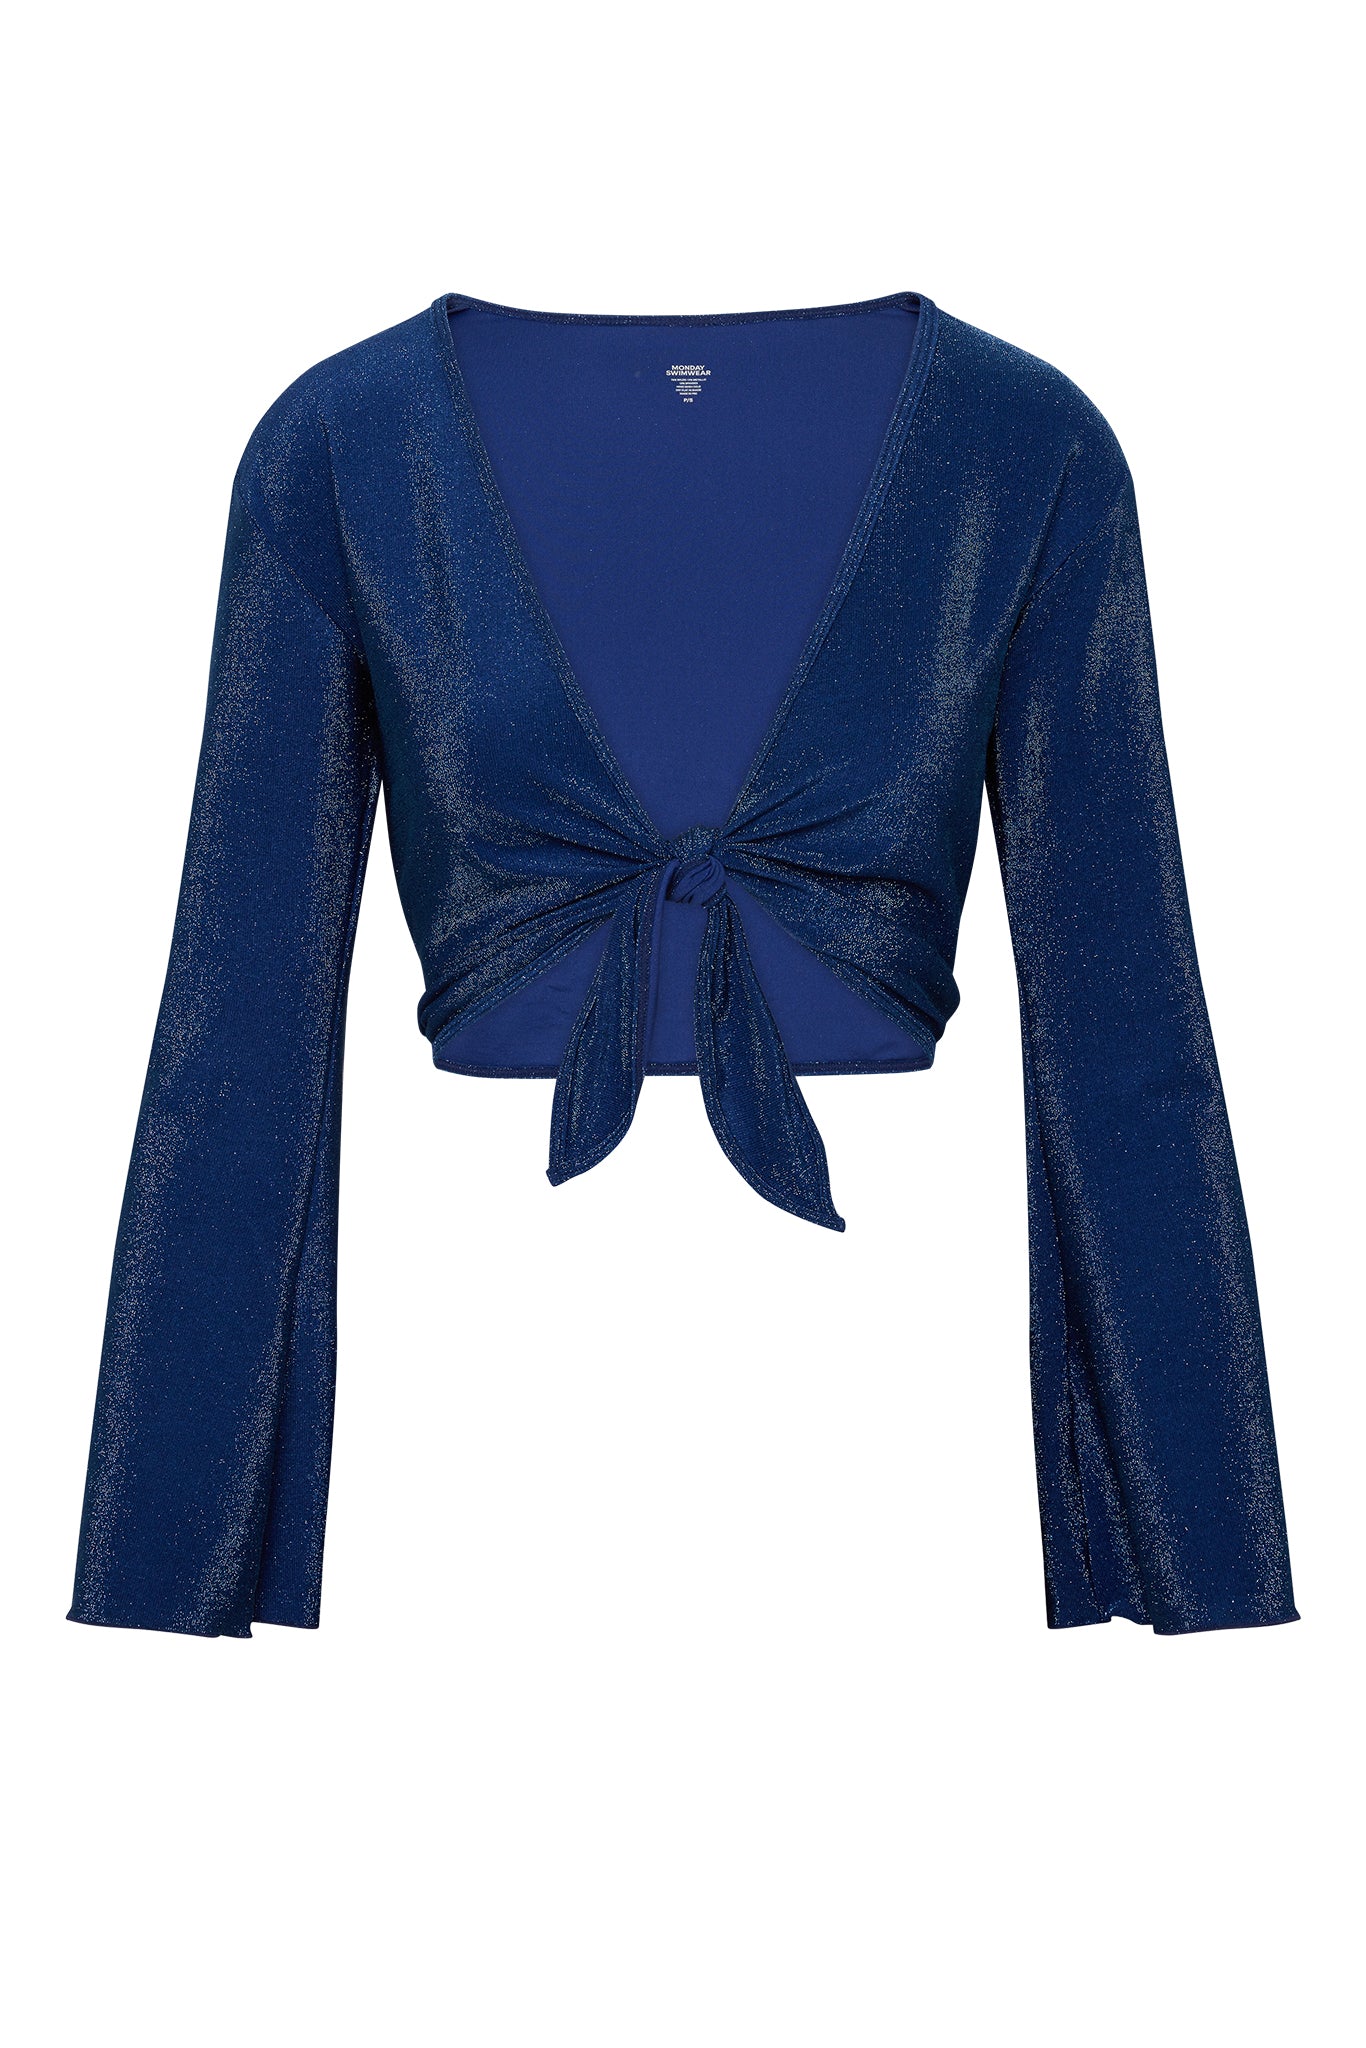 St Barth's Top  | Navy Shimmer